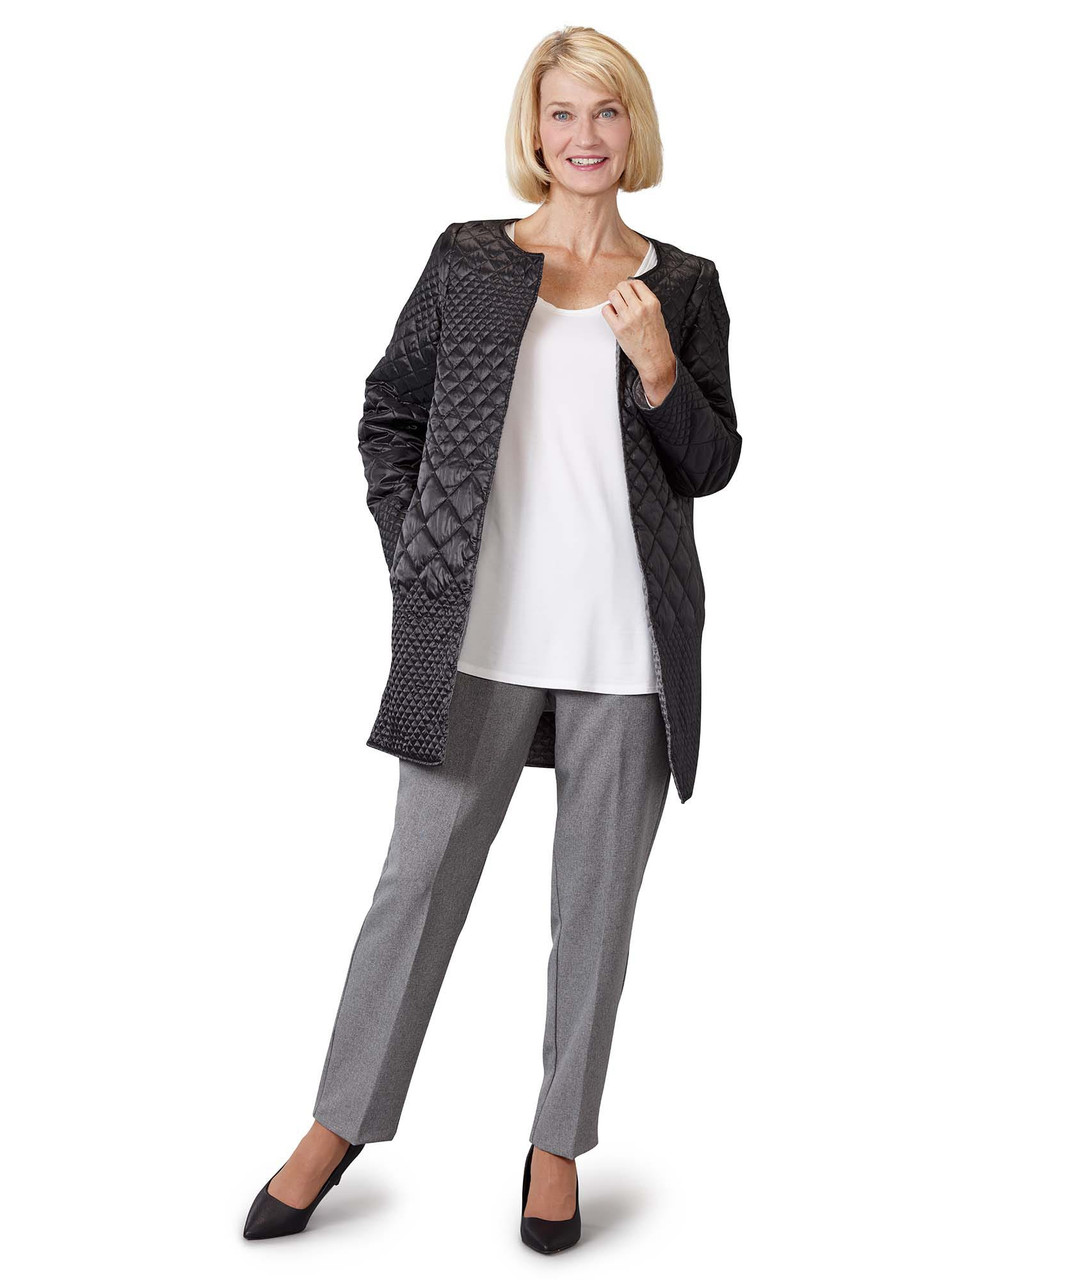 Silverts SV27040 Womens Reversible Quilted Jacket with Detachable Sleeves Black/Silver, Size=2XL, SV27040-SV1452-2XL